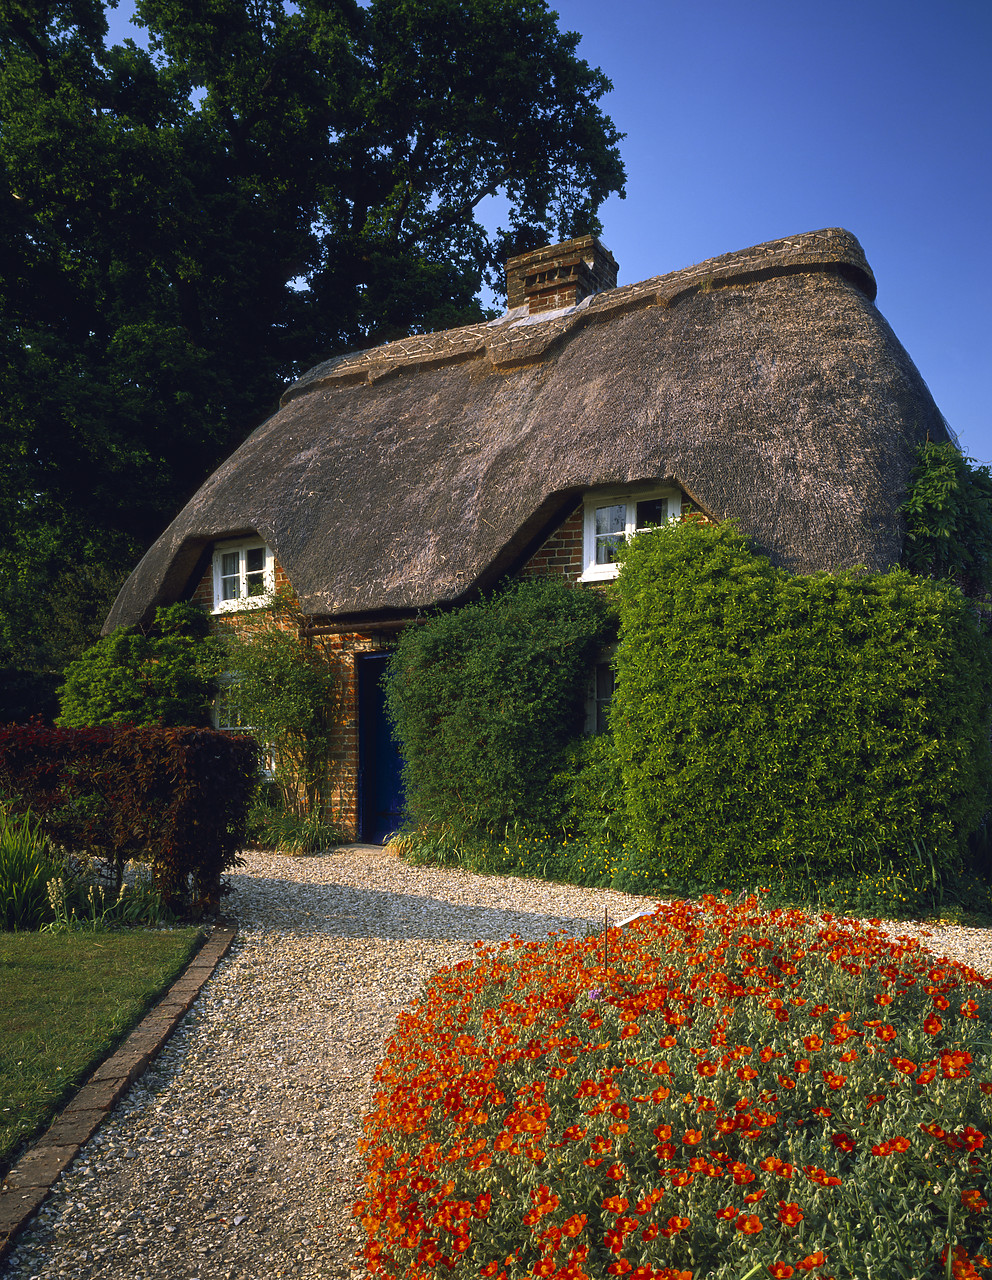 #902858-2 - Thatched Cottage, Minstead, Hampshire, England